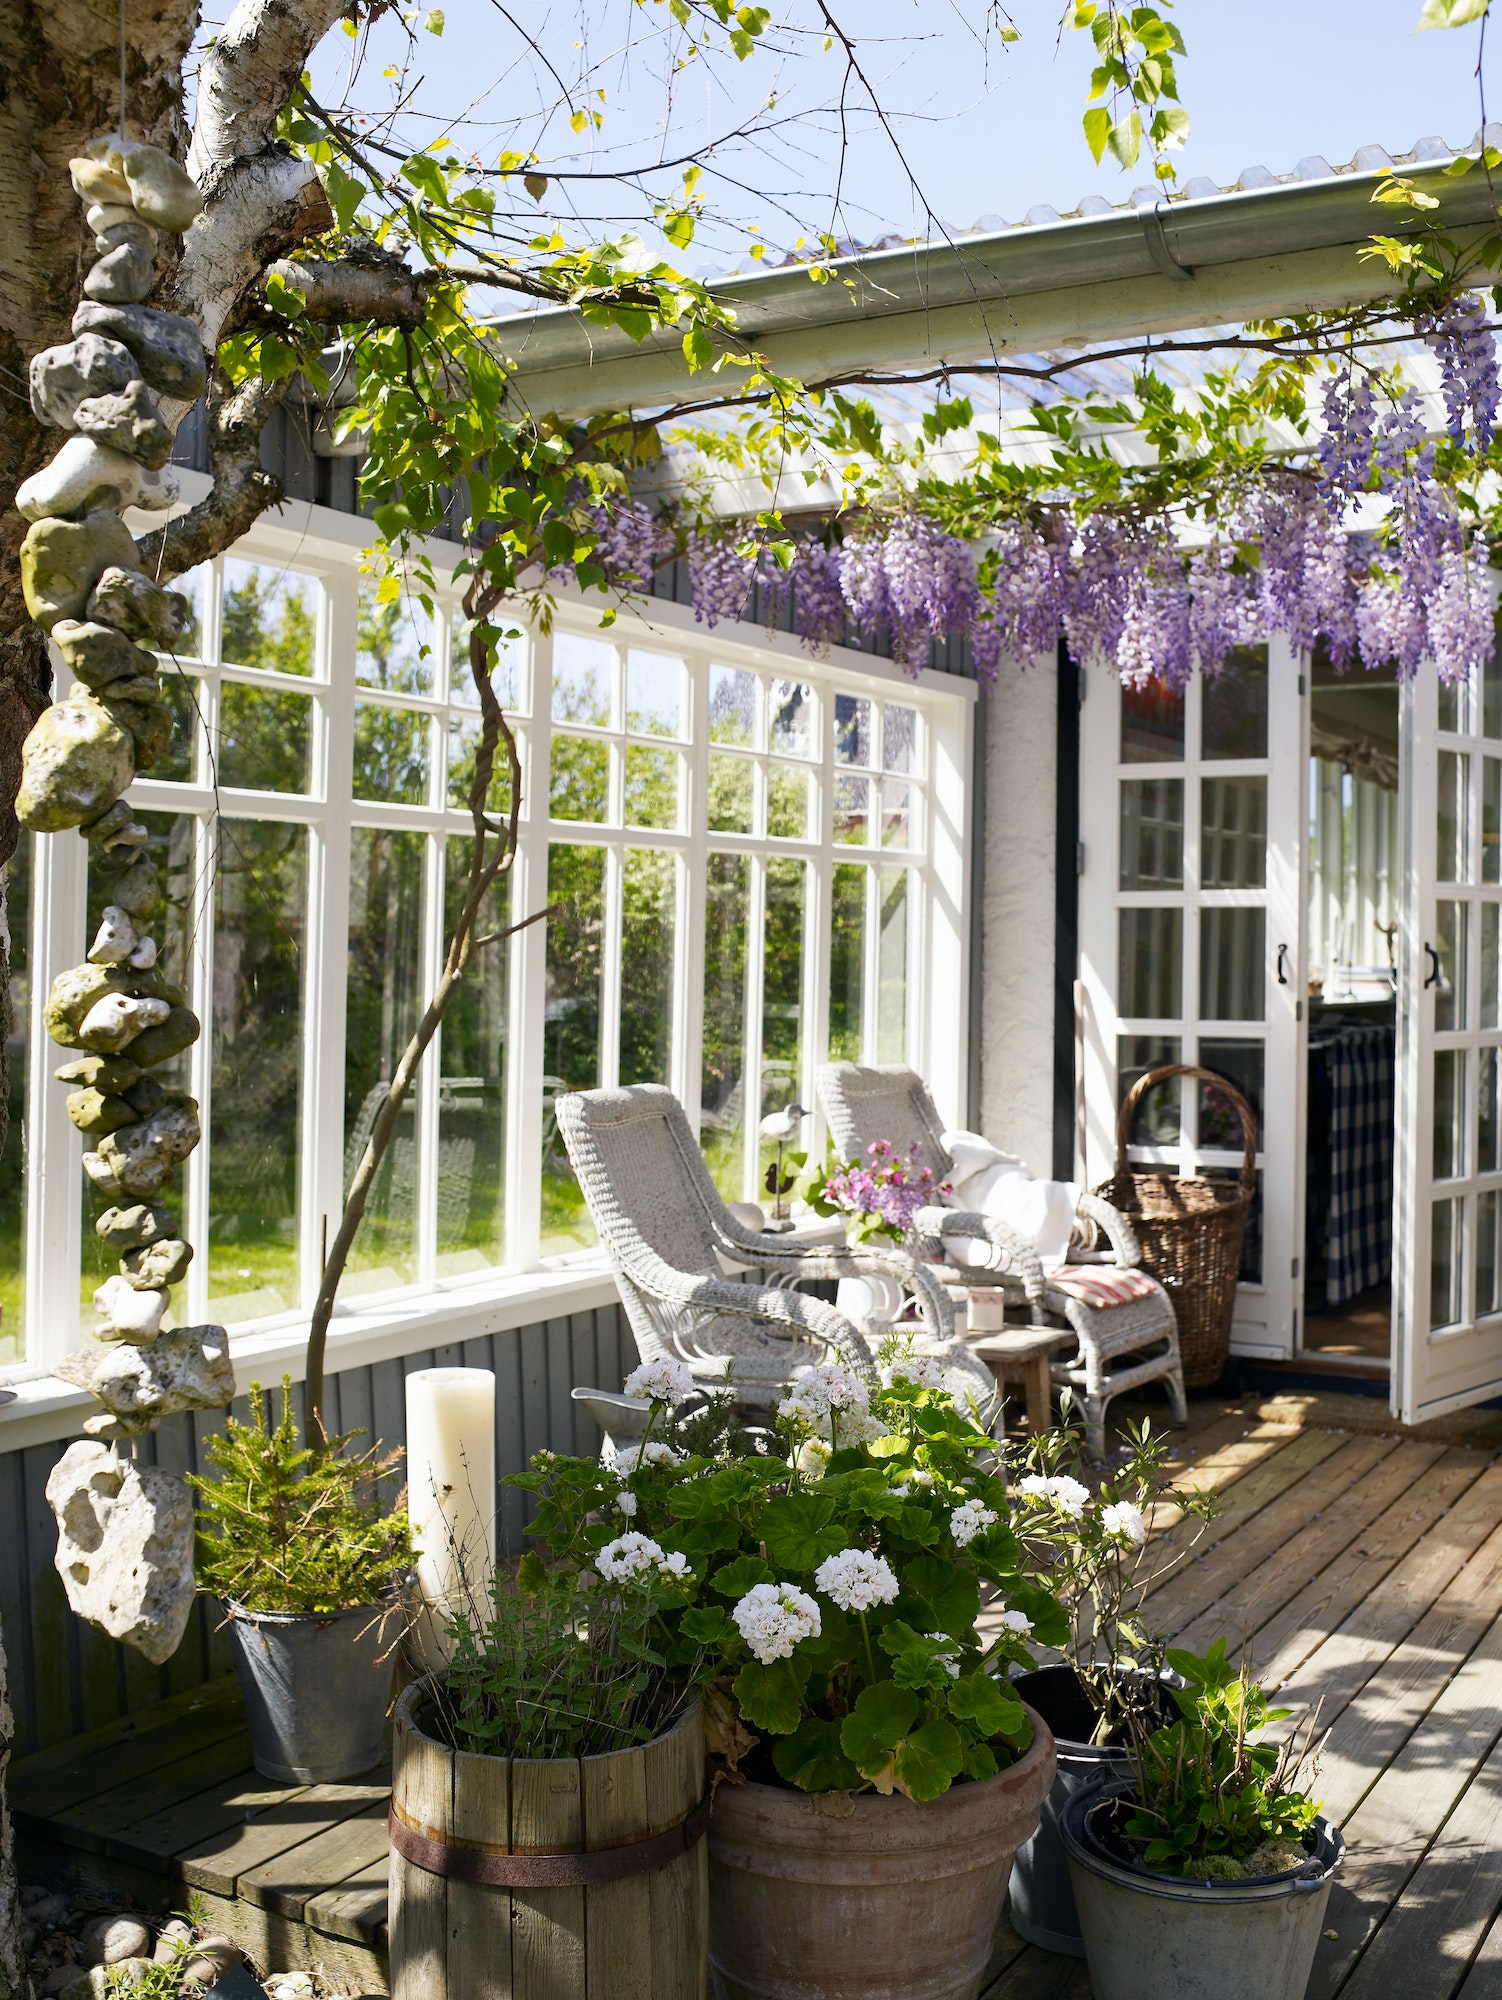 Wicker chairs and purple wisteria blossoms on patio